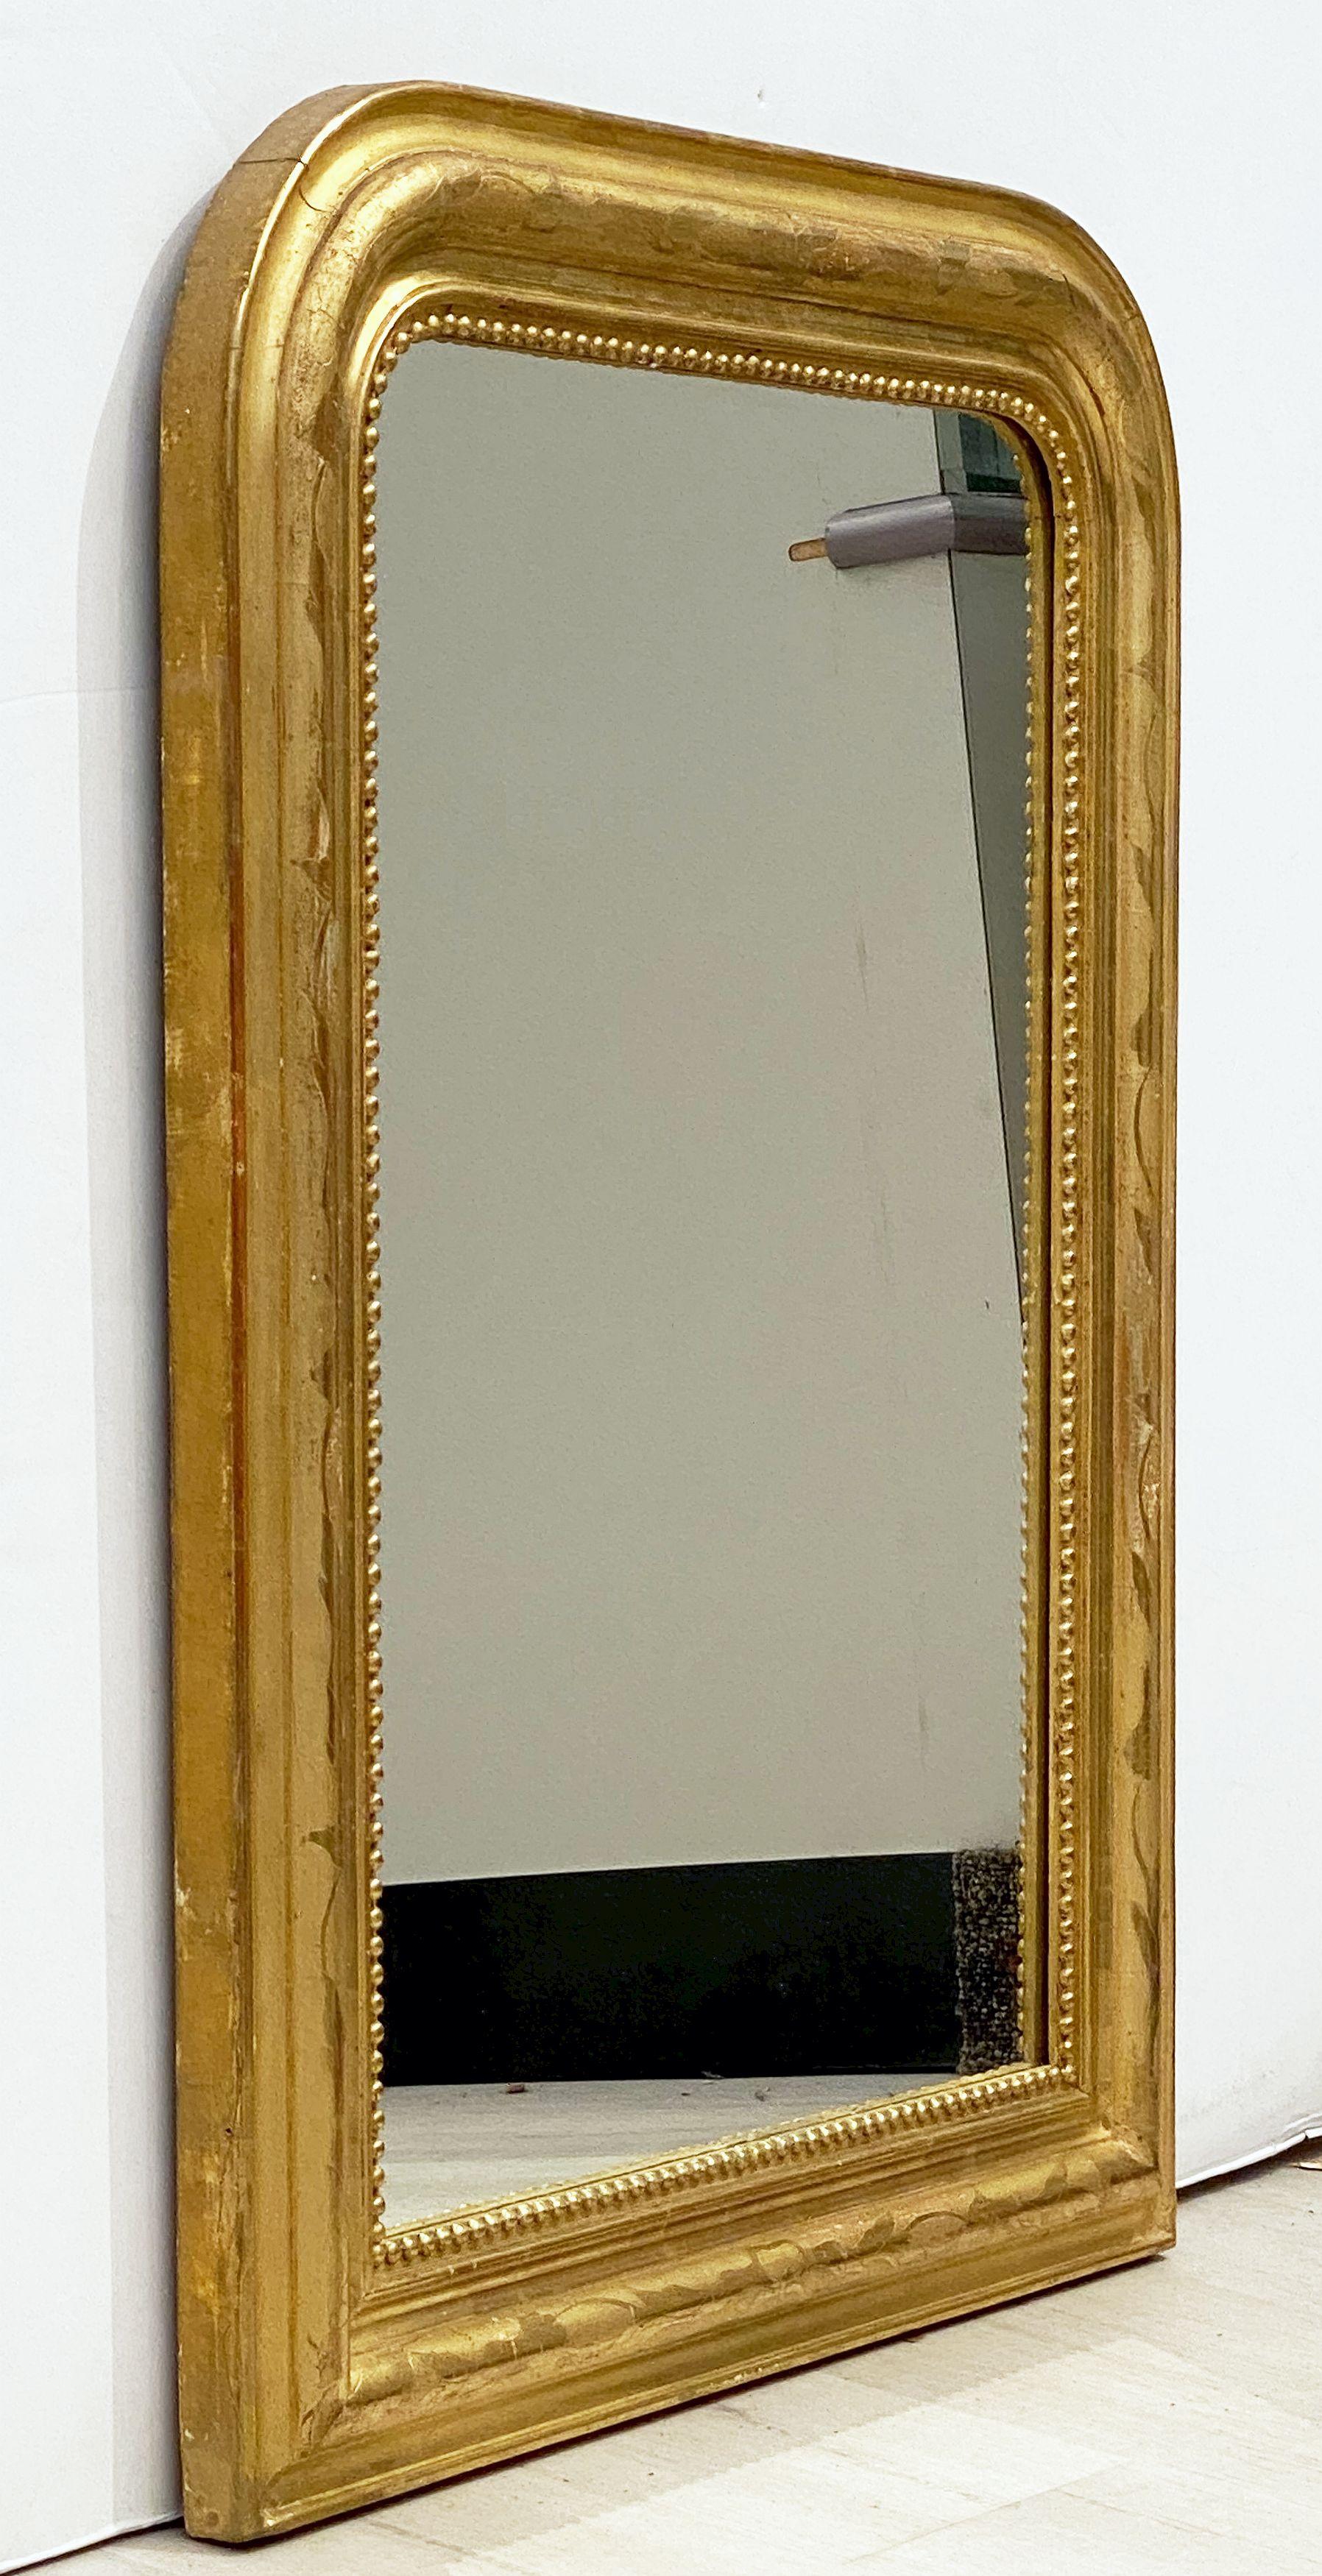 A handsome Louis Philippe gilt wall mirror featuring a lovely moulded surround with an etched foliate design showing through gold-leaf.

Dimensions: H 30 inches x W 22 3/4 inches

Other sizes available in this style.